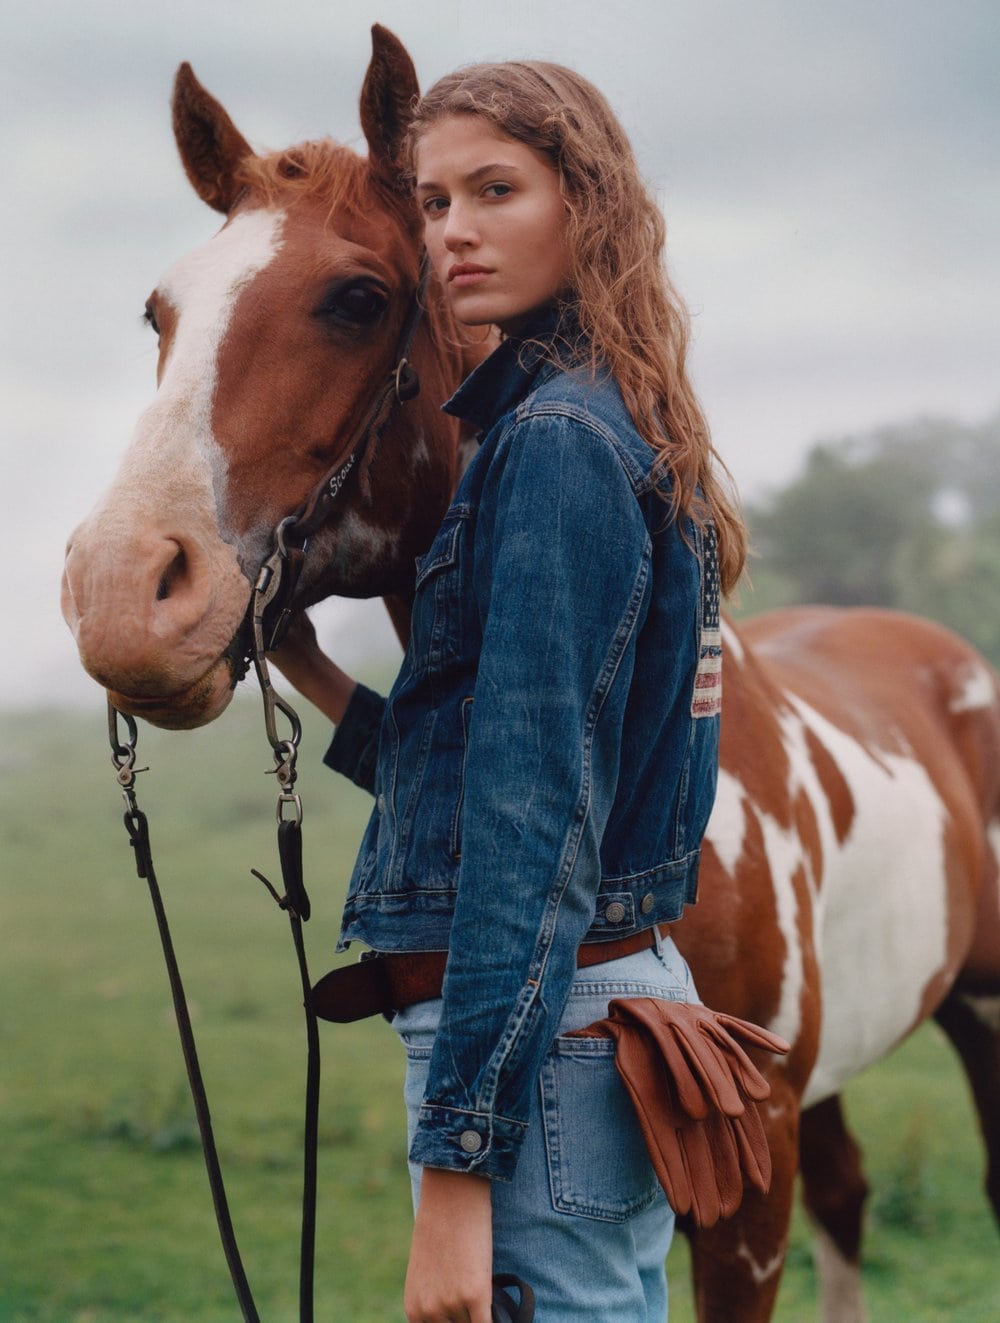 Ralph Lauren’s new denim line is all about sustainability